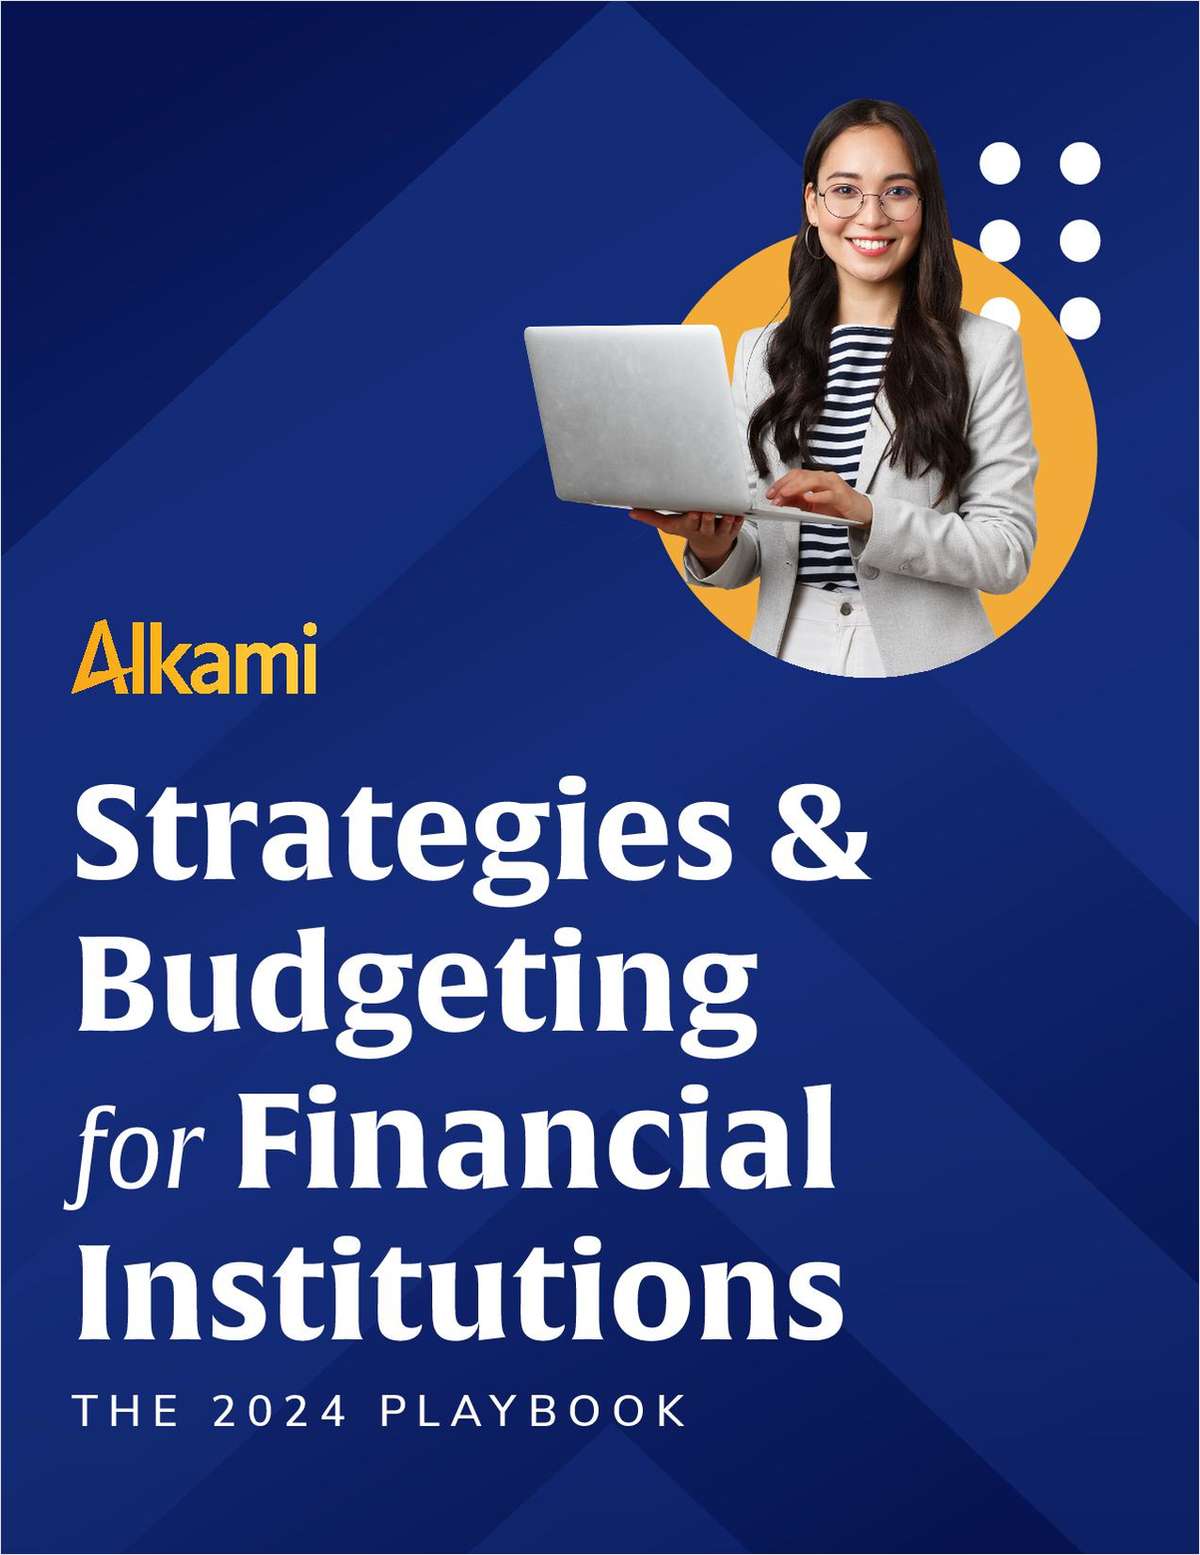 The 2024 Playbook: Budgeting & Strategies for Credit Union Success